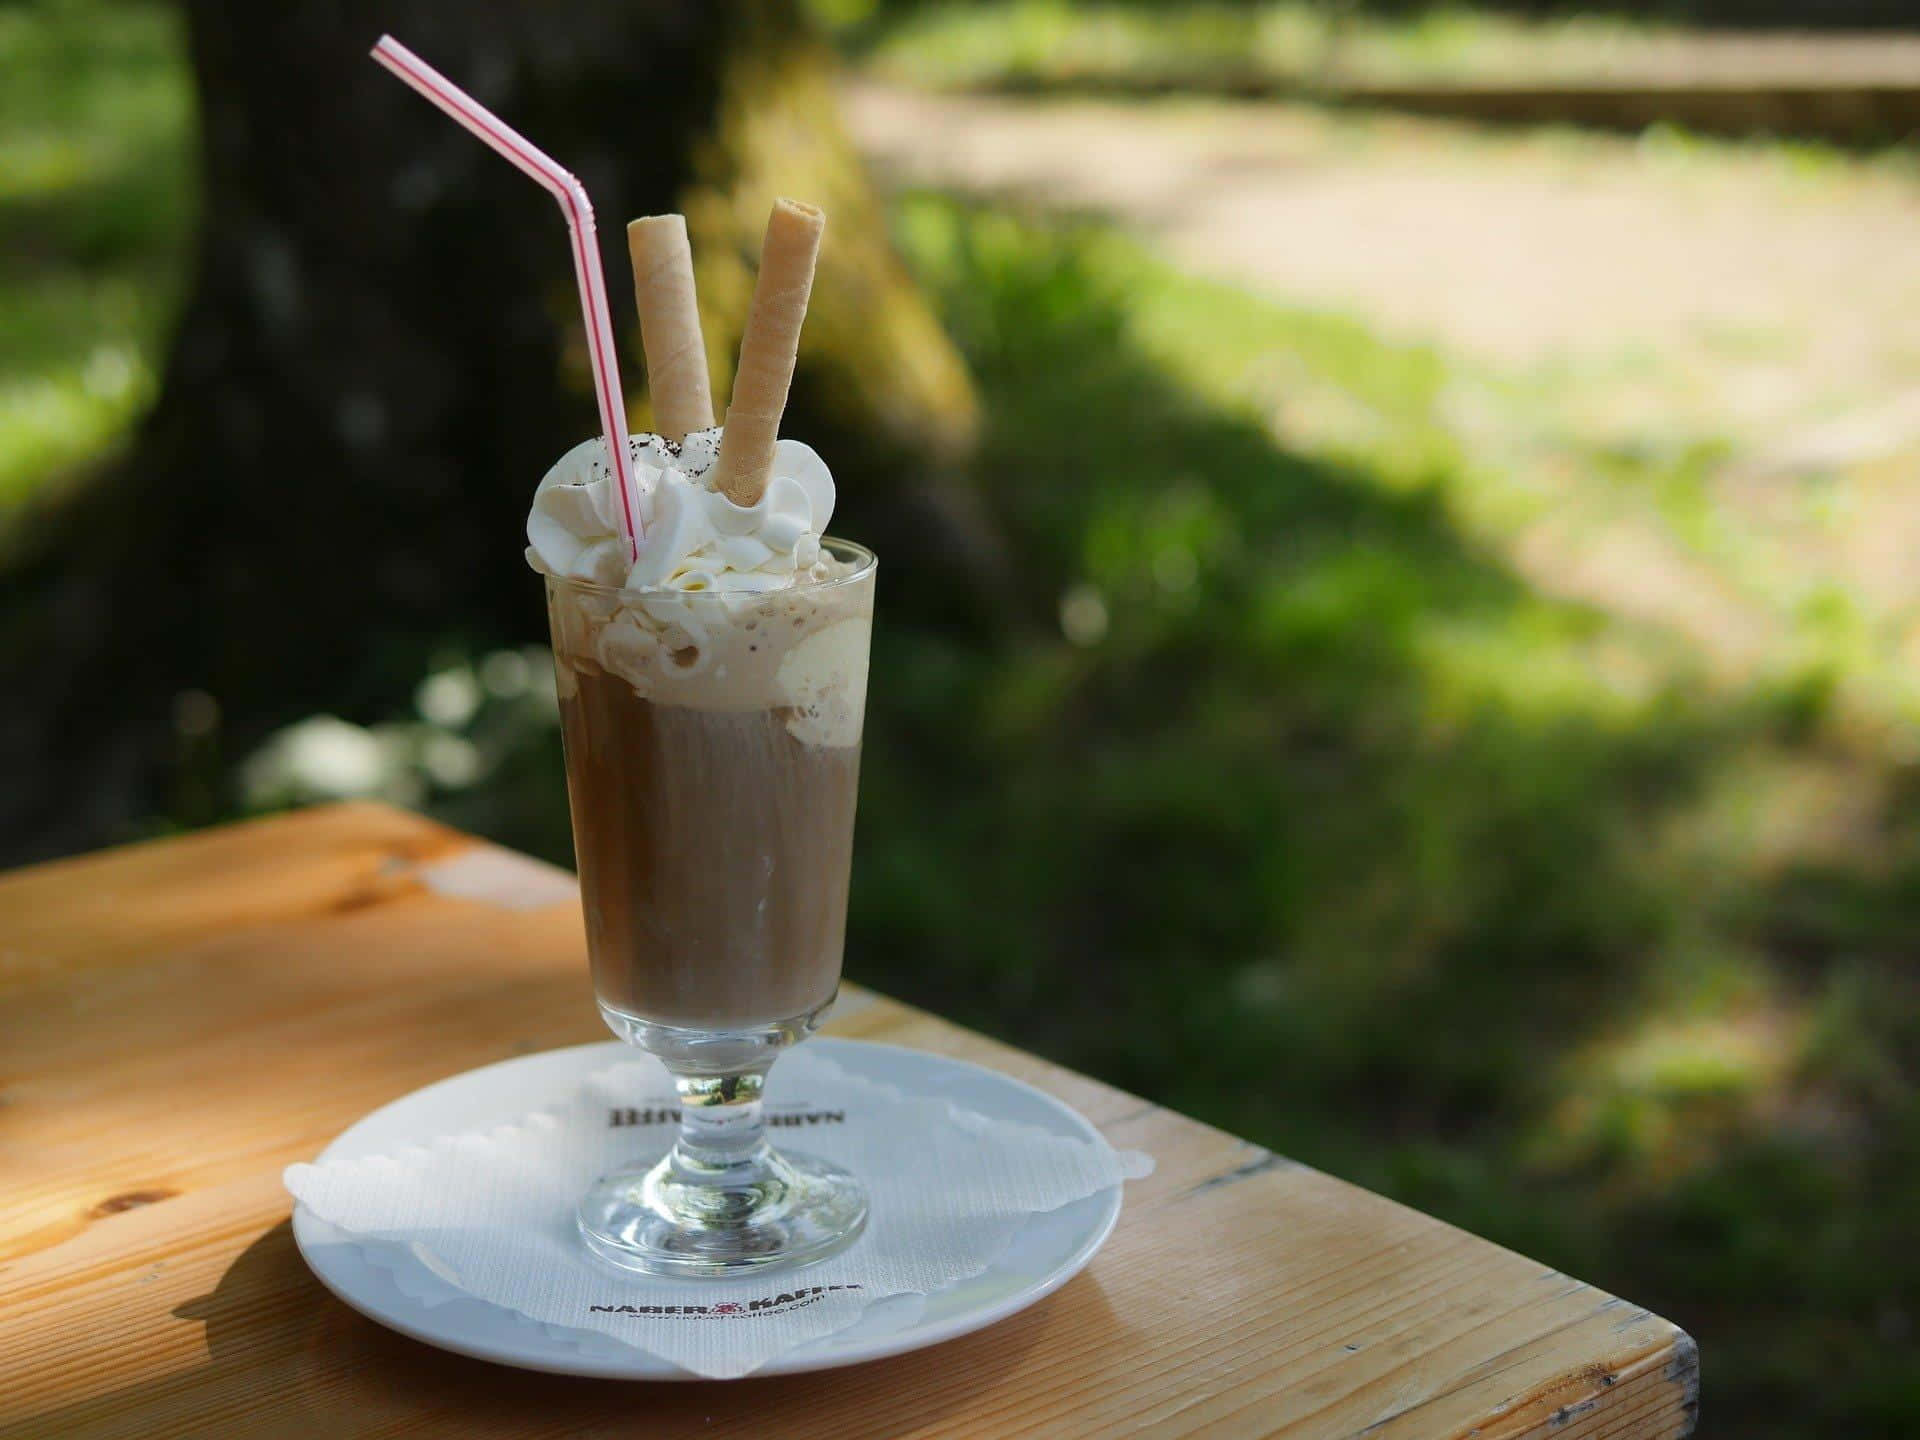 A Chocolate Drink With A Straw On A Wooden Table